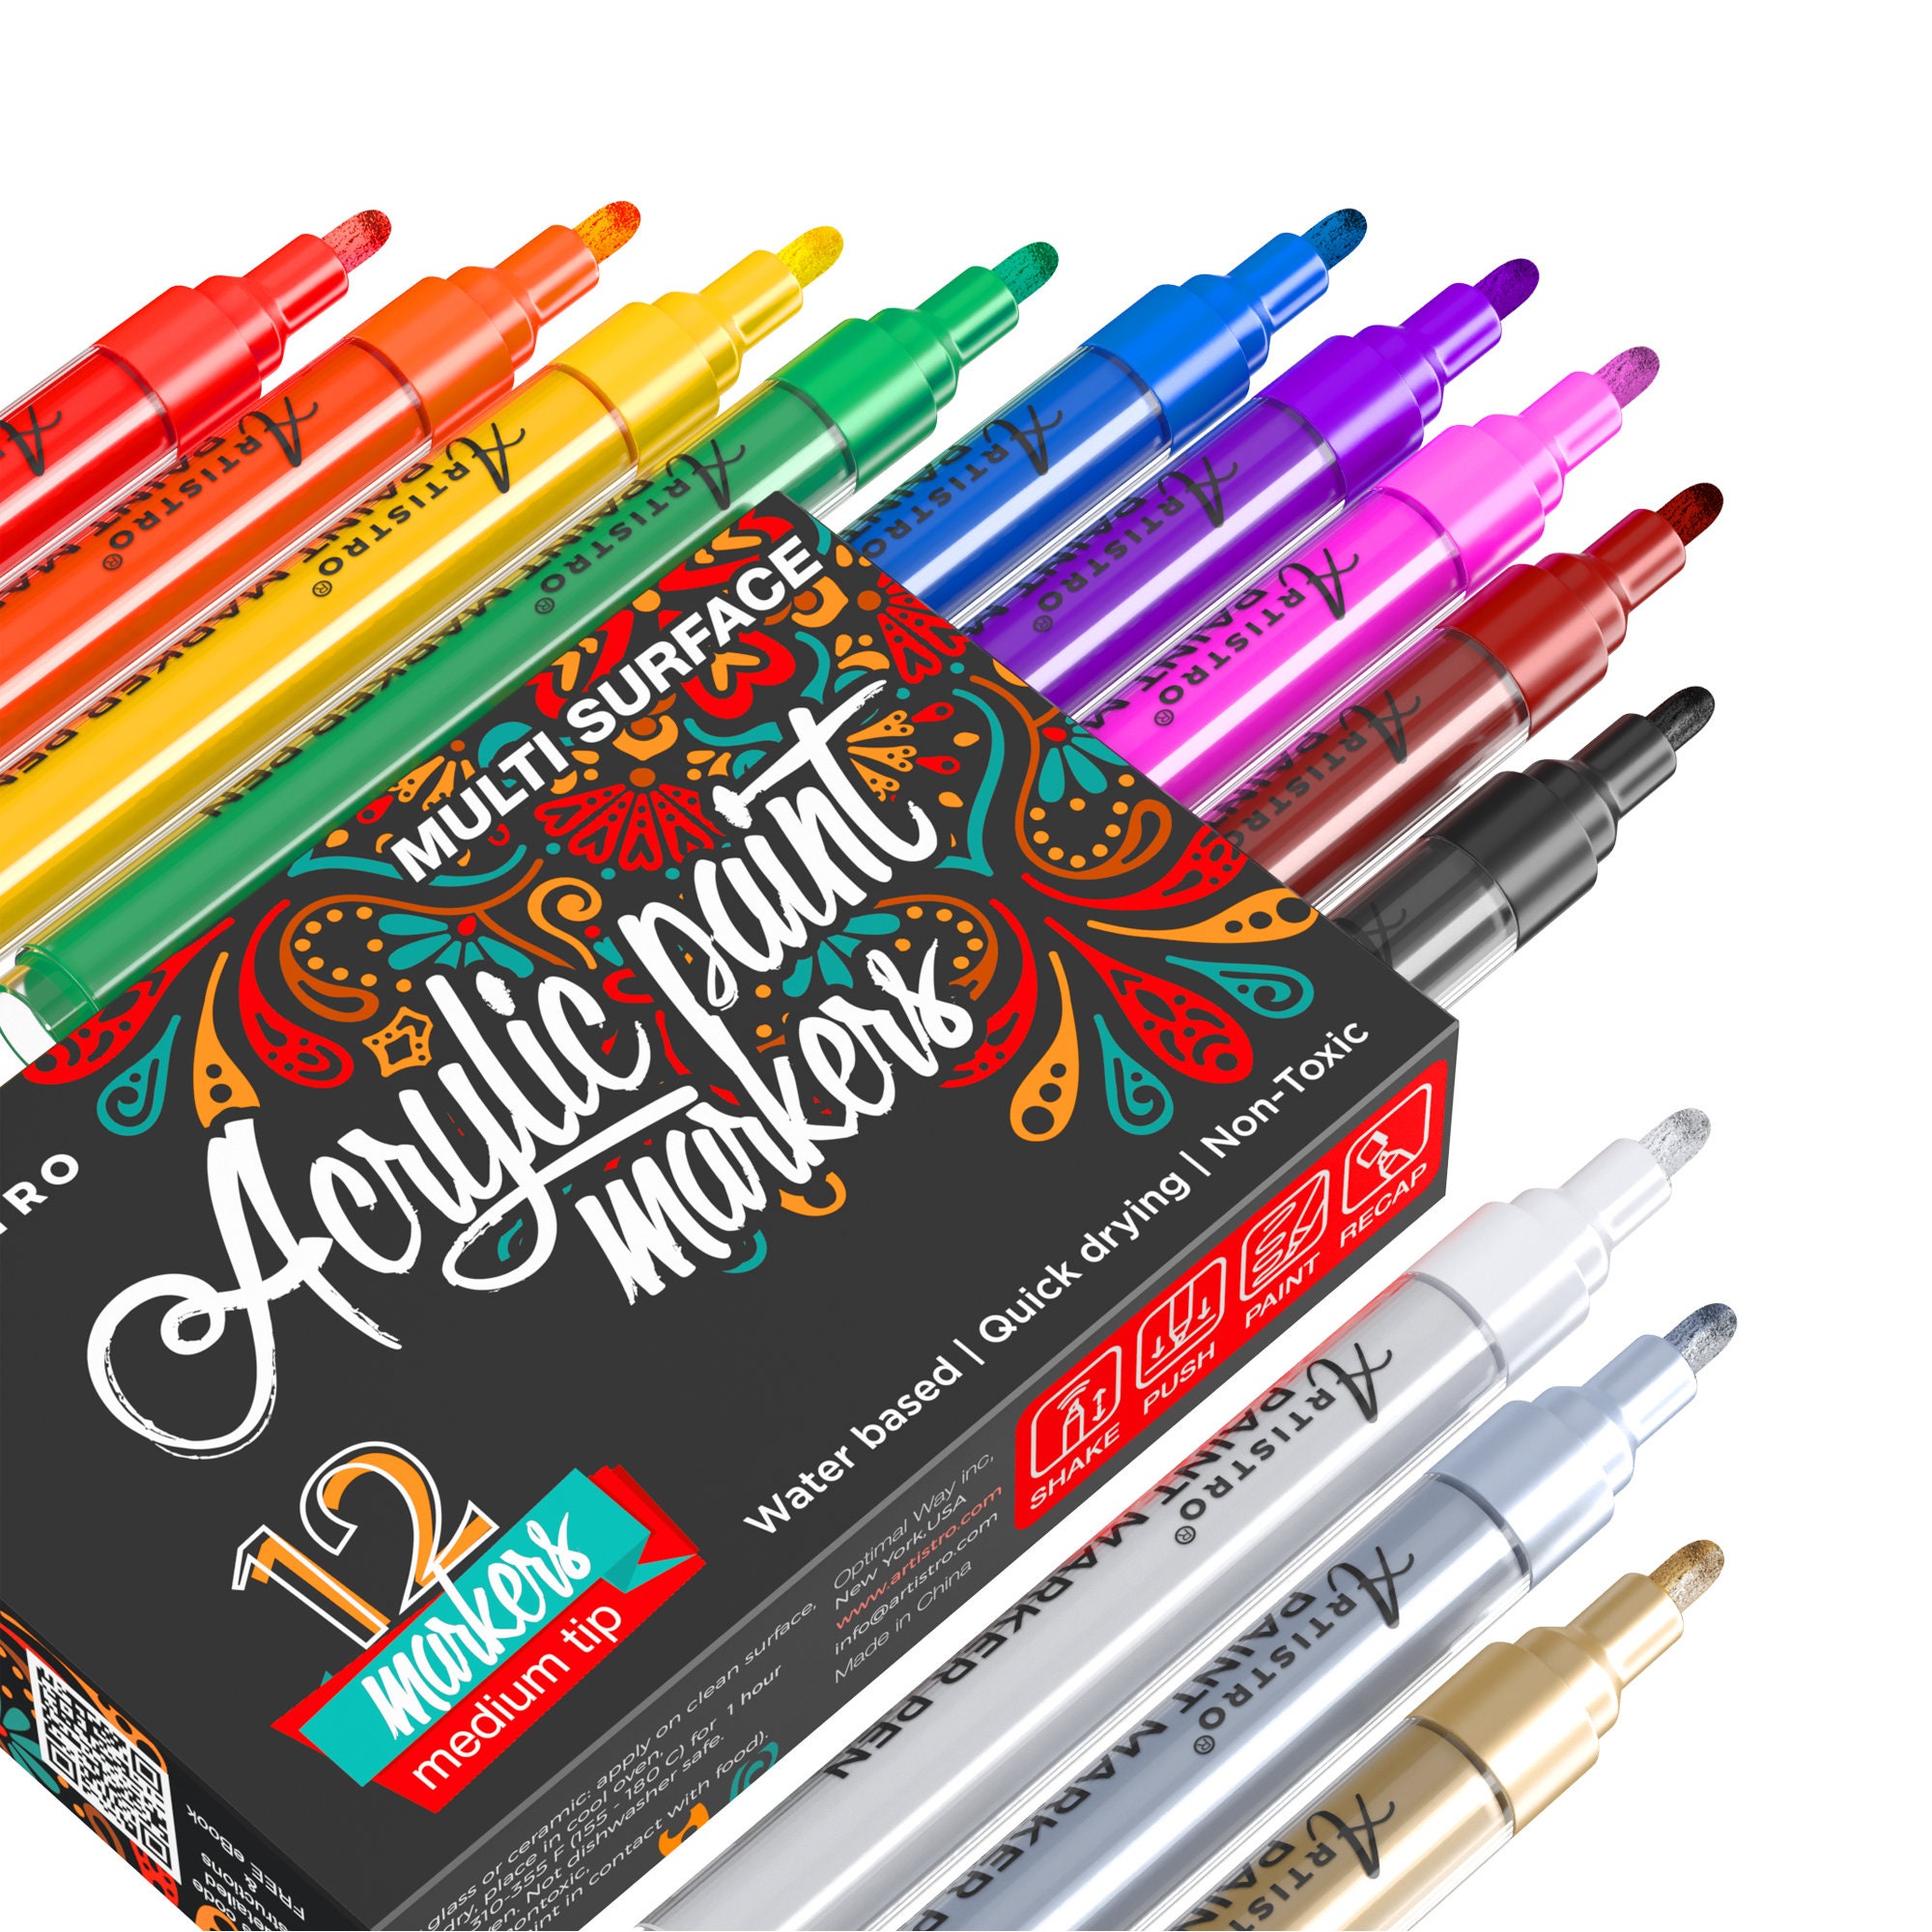 Artistro Outline Markers, 16 Outline Pens, 5 Cards, Gold und Silver  Metallic Outline Markers, Double Line Outline Pens, Self-Outline Metallic  Markers.